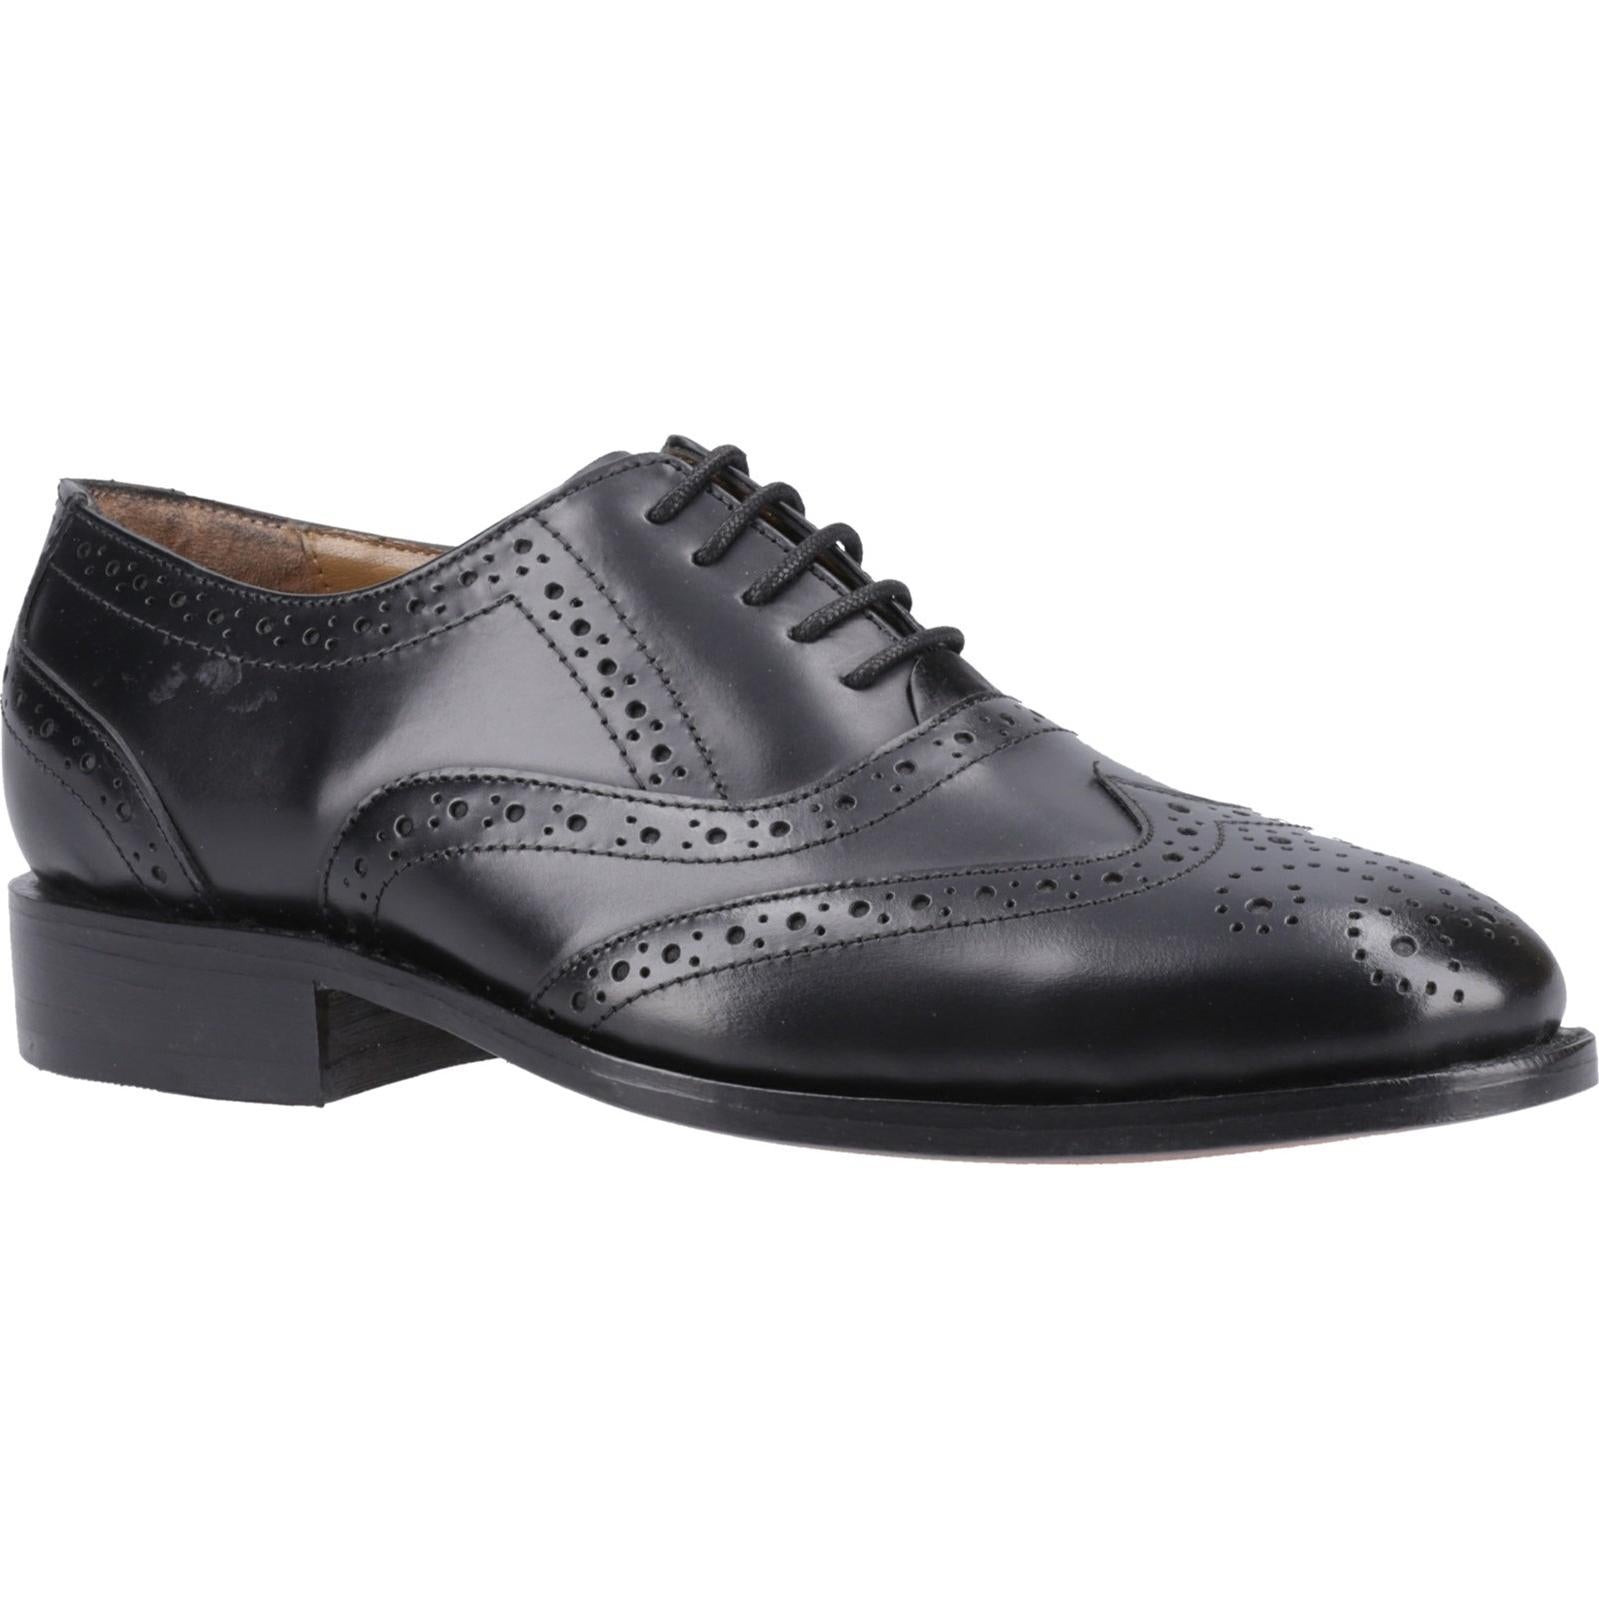 Amblers Ben Leather Soled Oxford Brogue Shoes